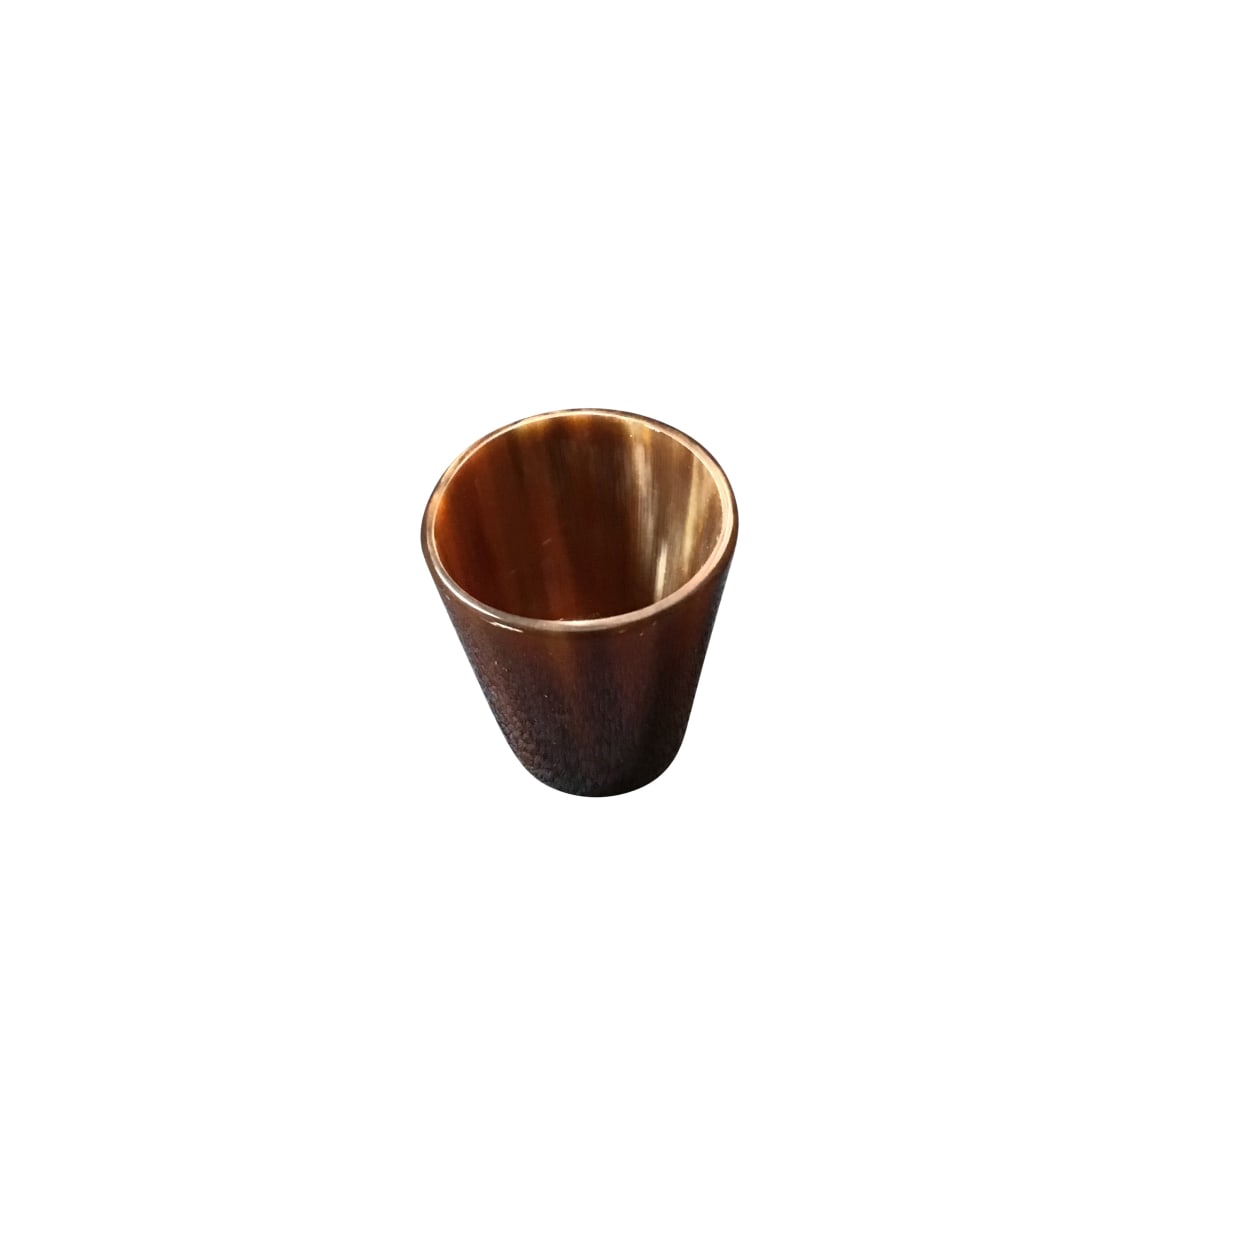 Horn Cups / Tumblers - Size: 4"